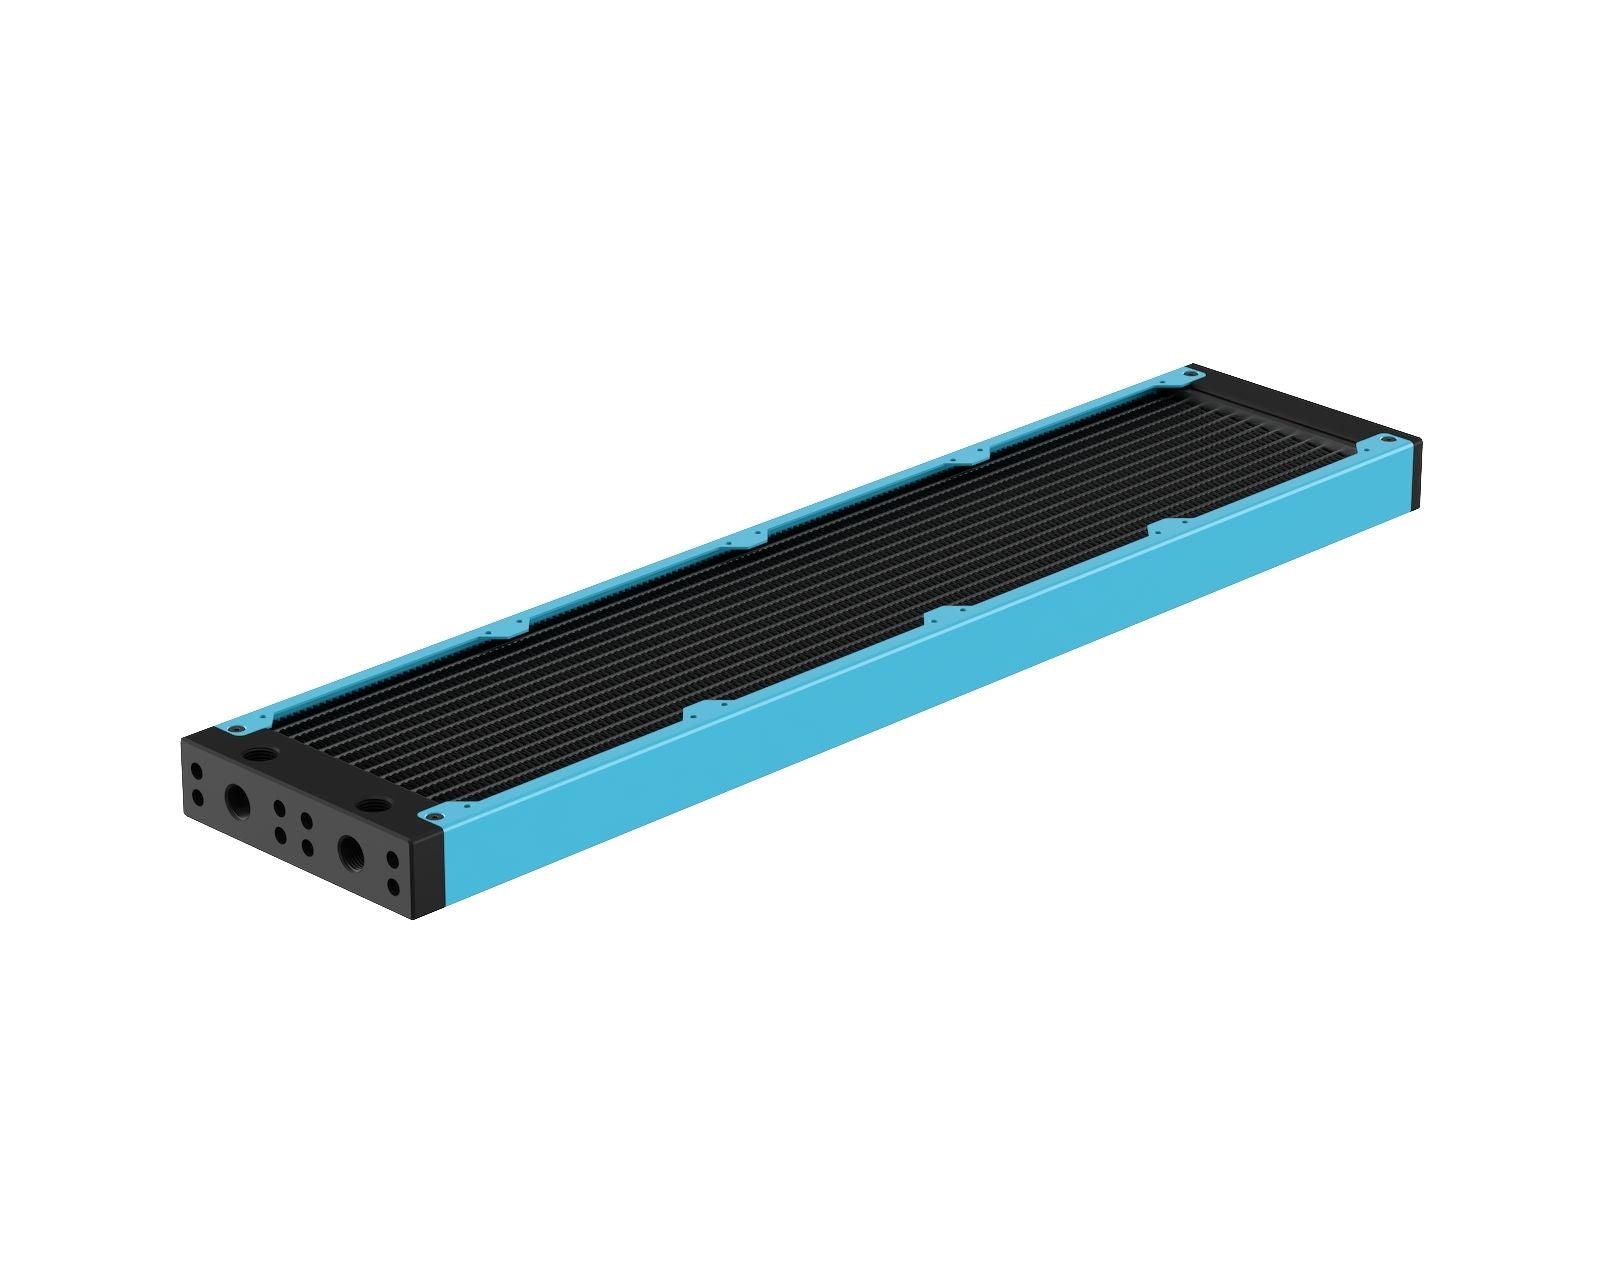 PrimoChill 480SL (30mm) EXIMO Modular Radiator, Black POM, 4x120mm, Quad Fan (R-SL-BK48) Available in 20+ Colors, Assembled in USA and Custom Watercooling Loop Ready - Sky Blue